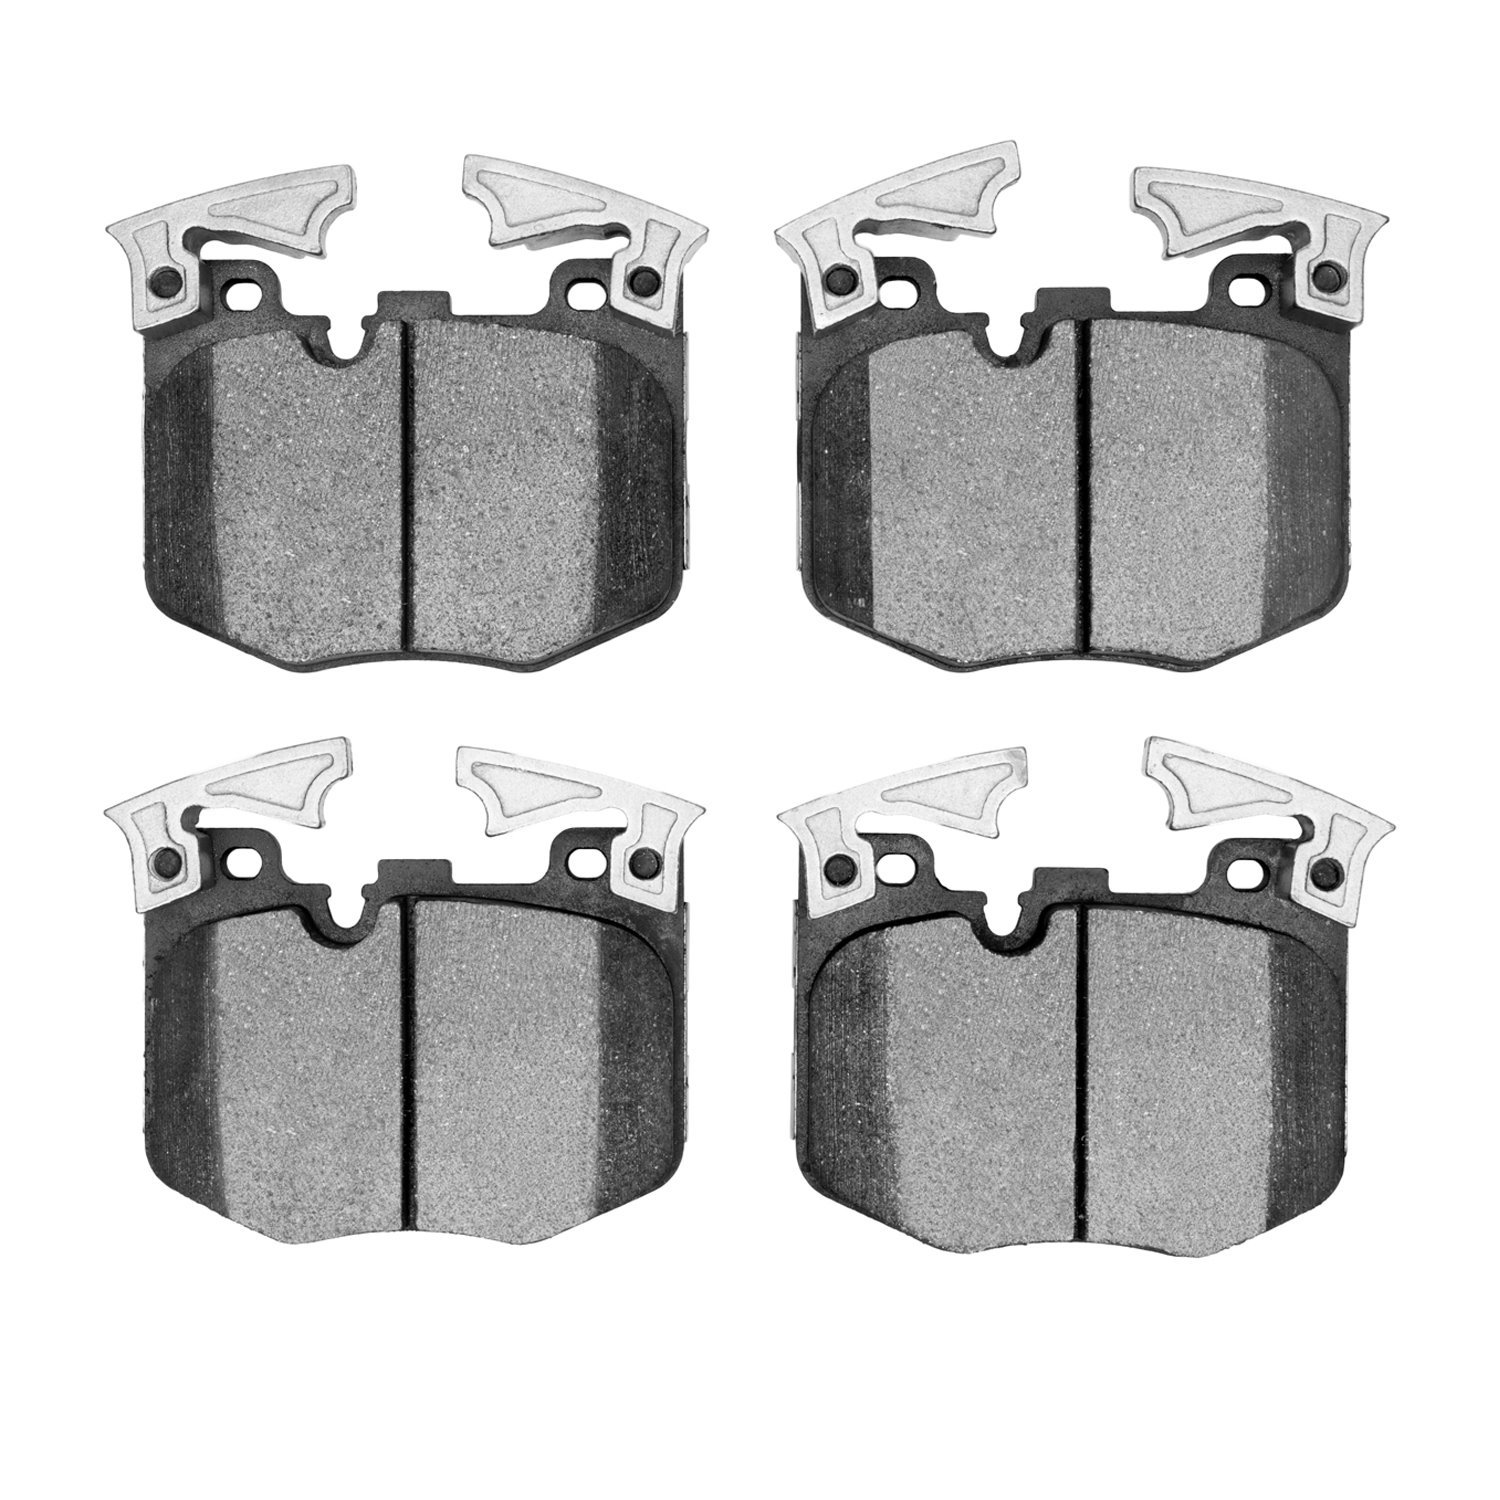 1551-1867-00 5000 Advanced Ceramic Brake Pads, Fits Select BMW, Position: Front